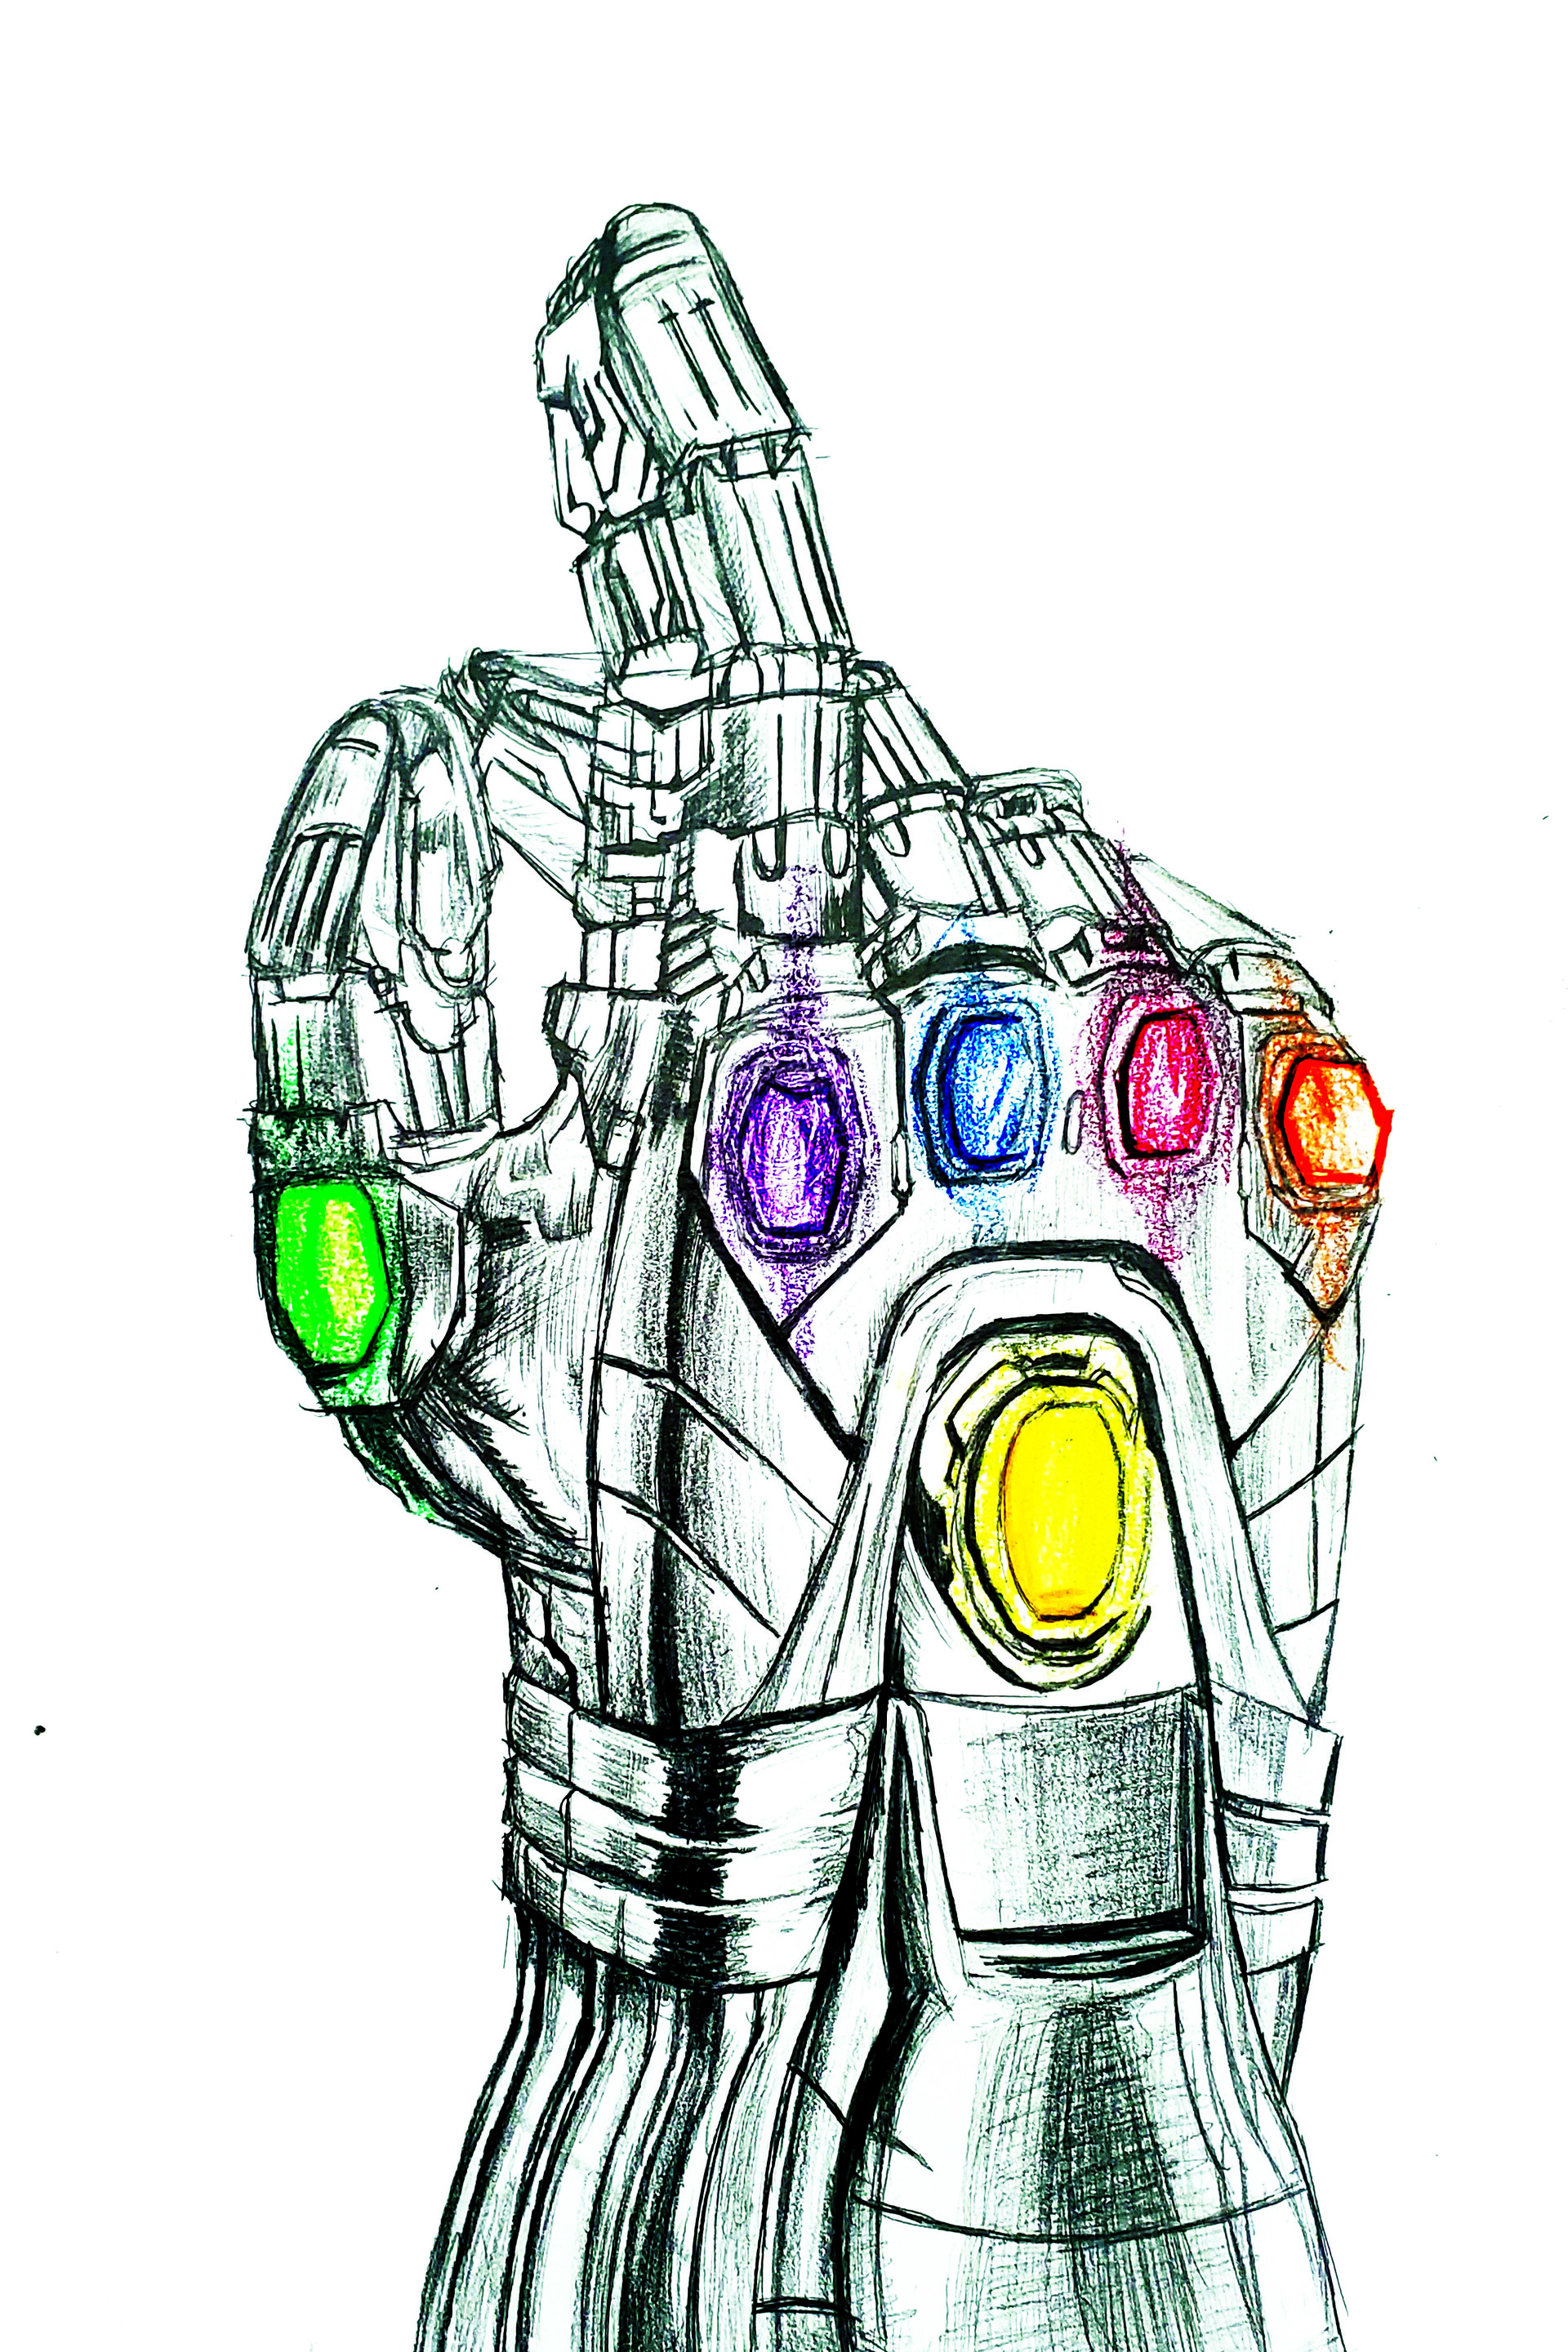 The rogue of Thanos when possessing the Infinity Gauntlet Coloring Pages -  Avengers Coloring Pages - Coloring Pages For Kids And Adults